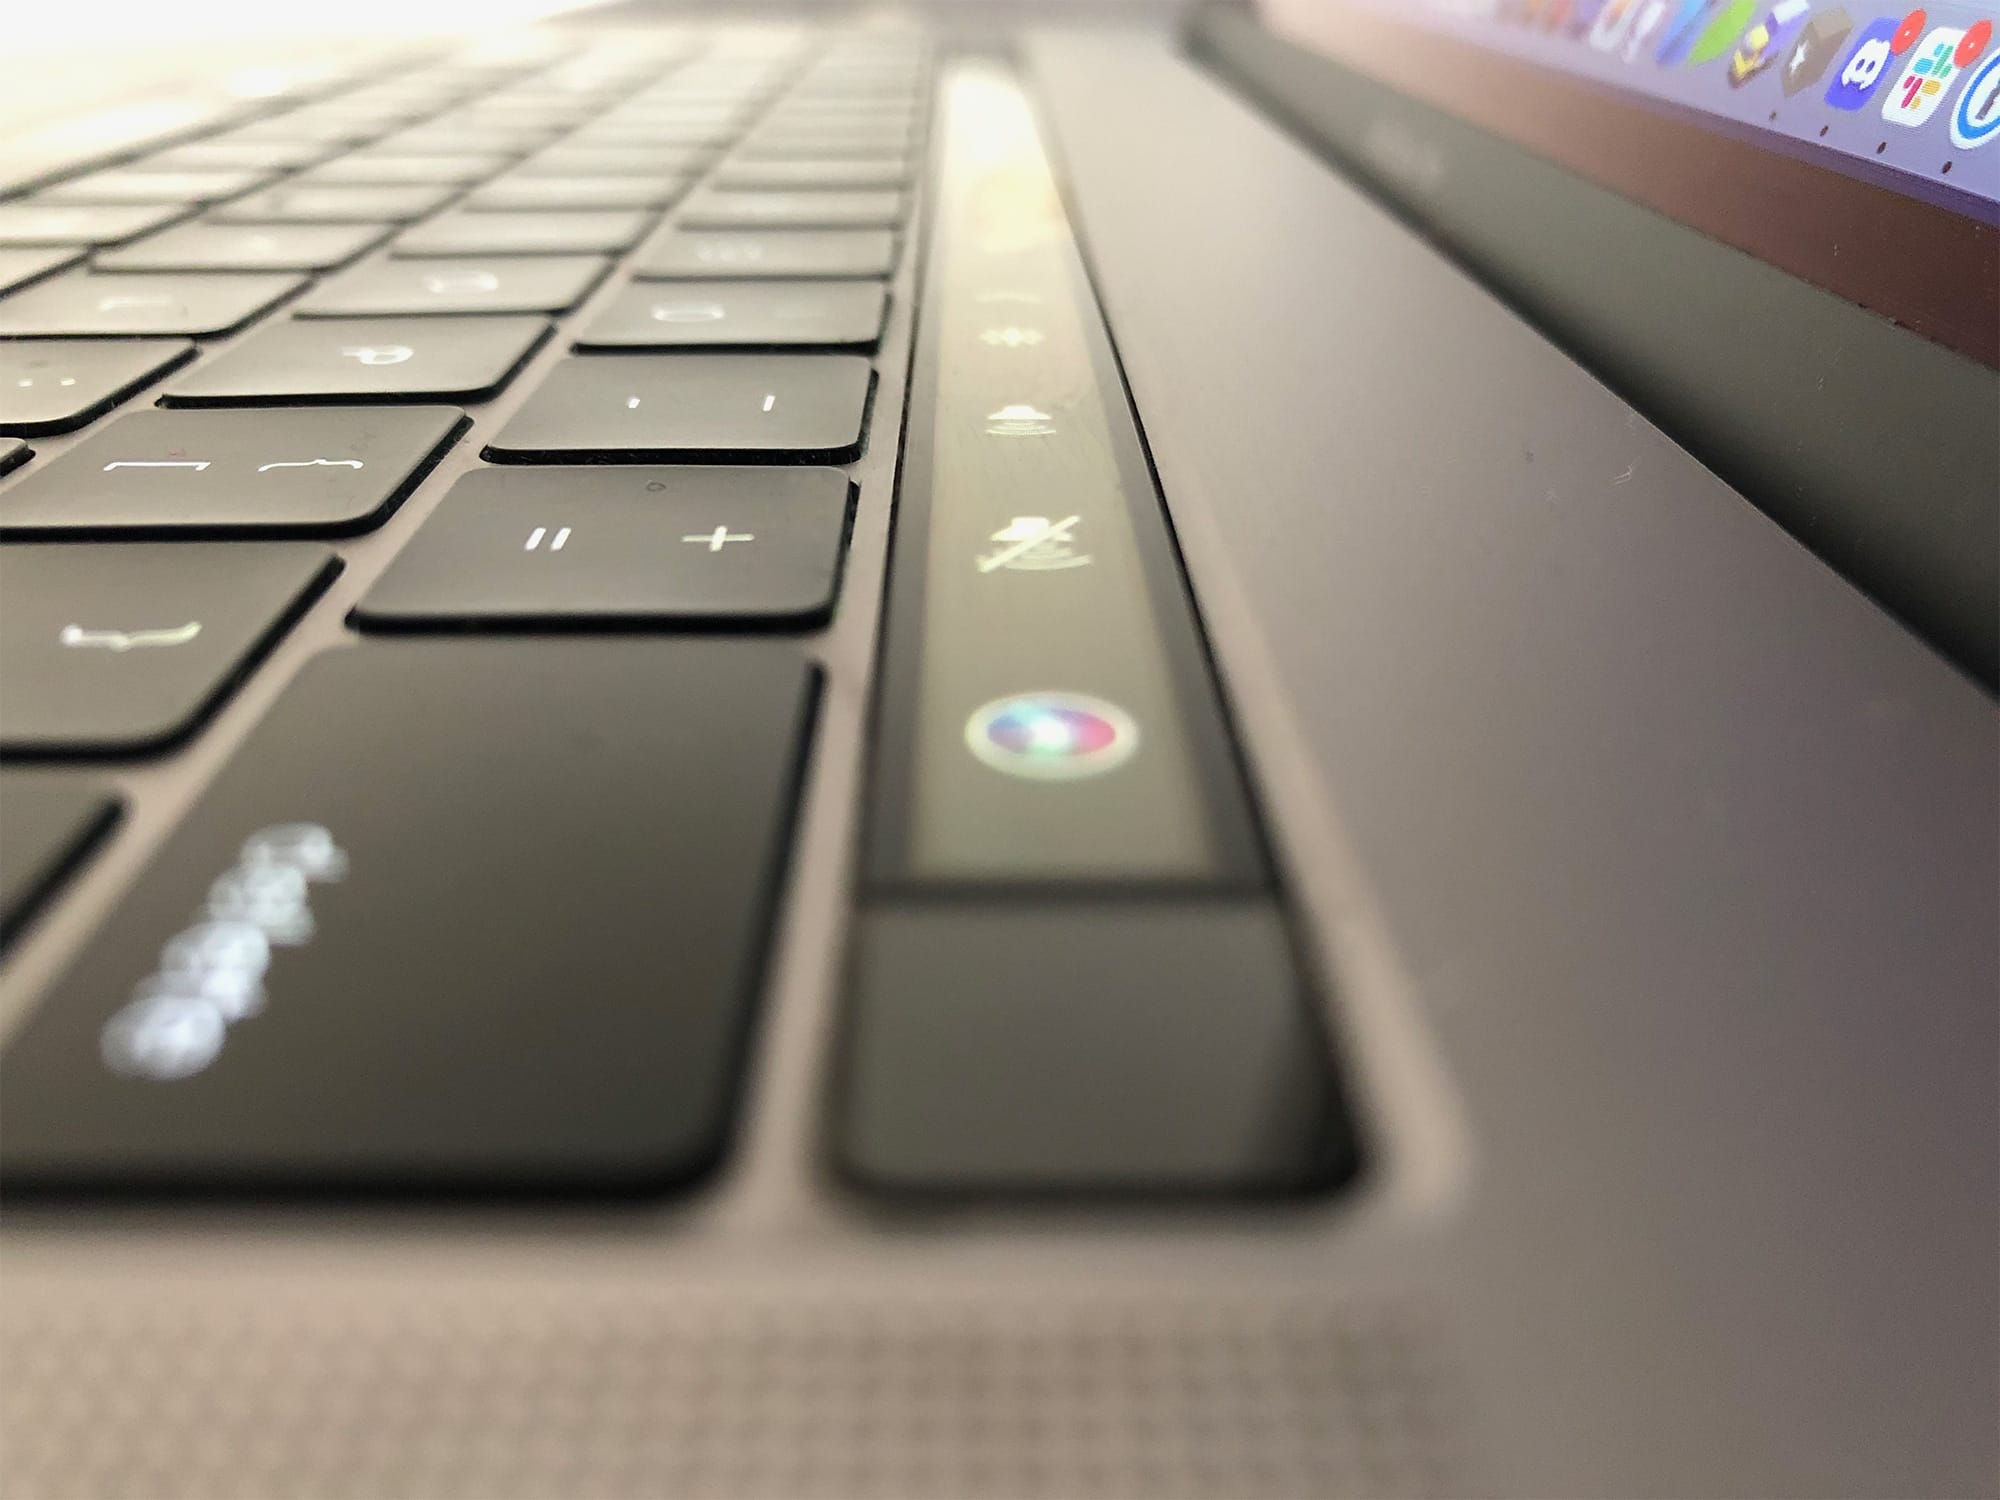 Is this the end of the road for the Touch Bar?